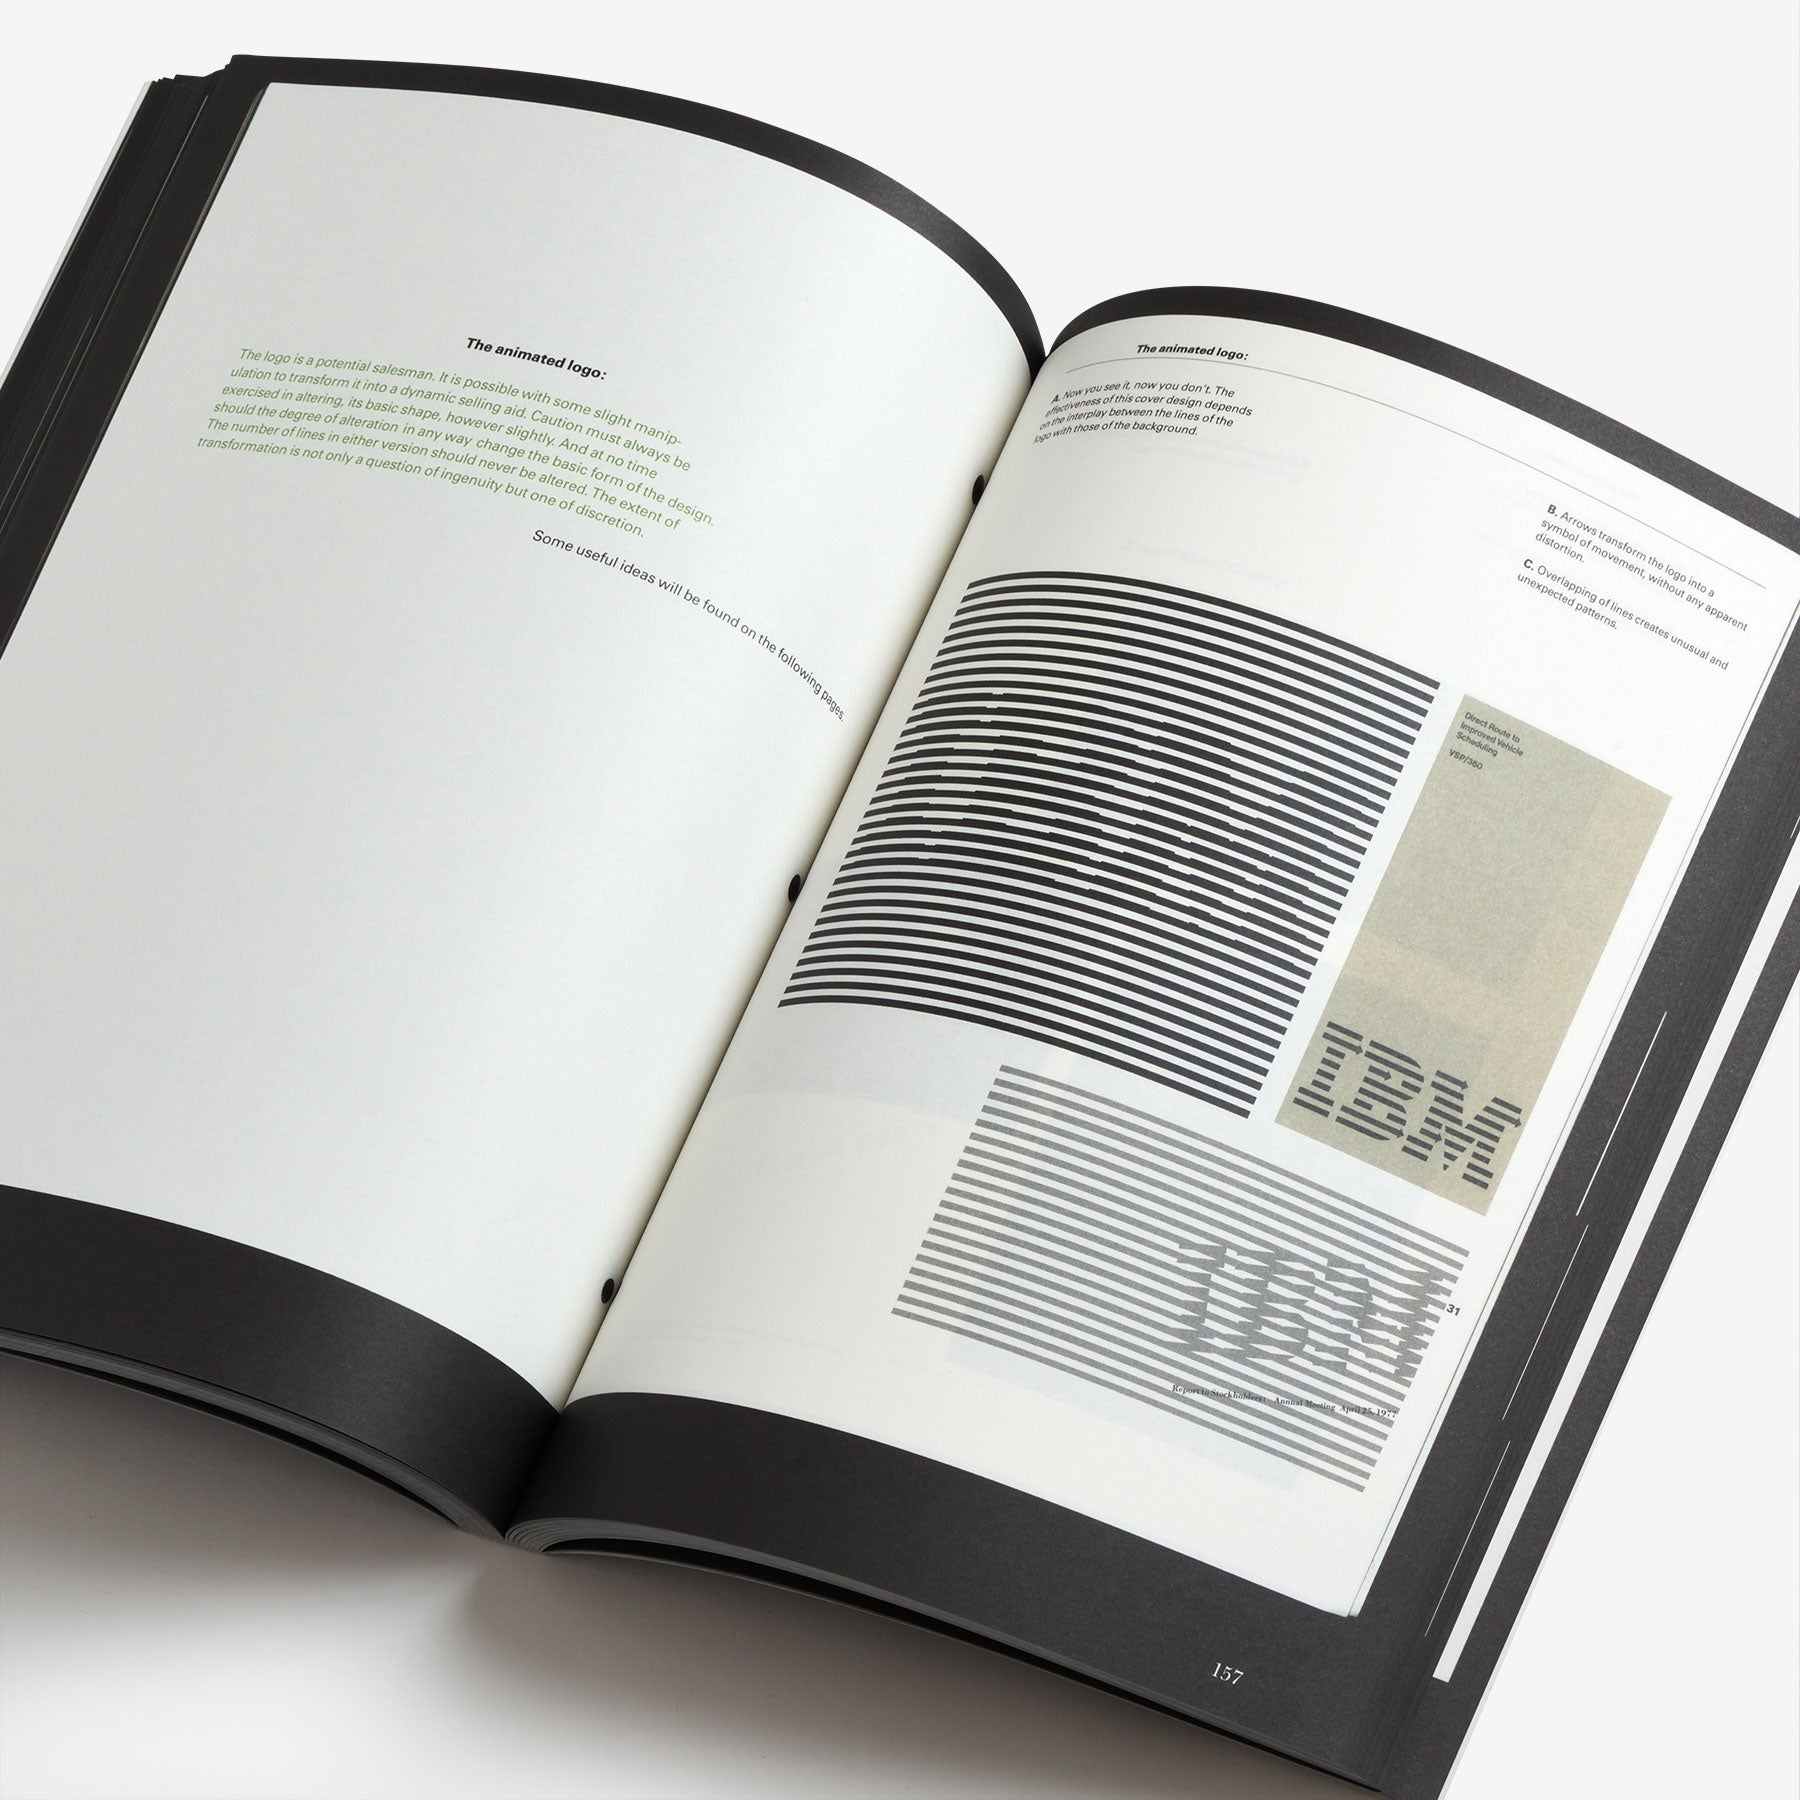 IBM: Graphic Design Guide from 1969 to 1987